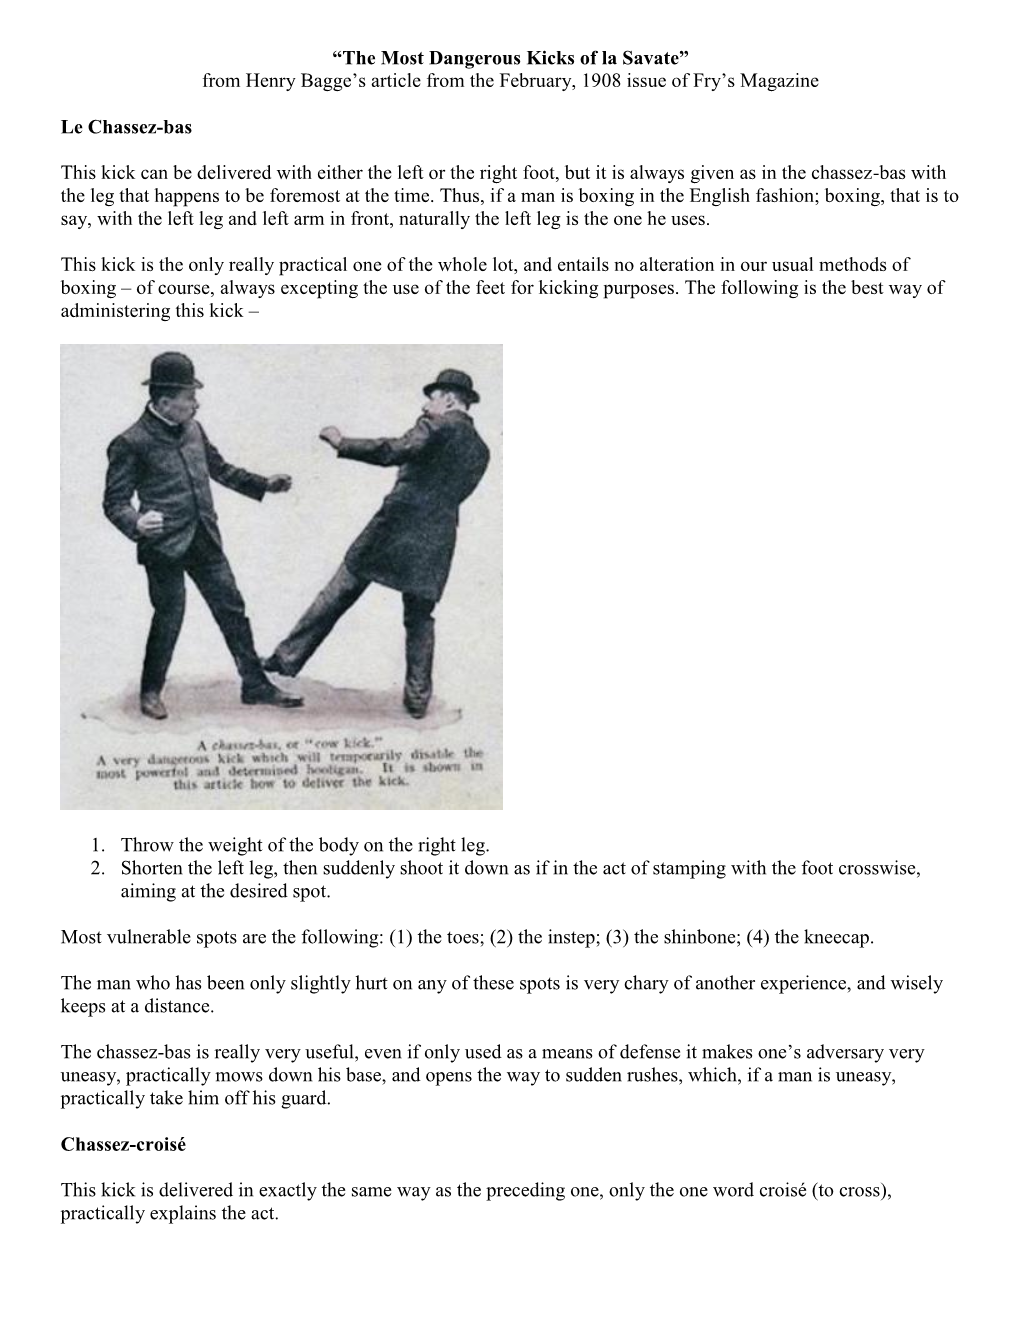 “The Most Dangerous Kicks of La Savate” from Henry Bagge's Article